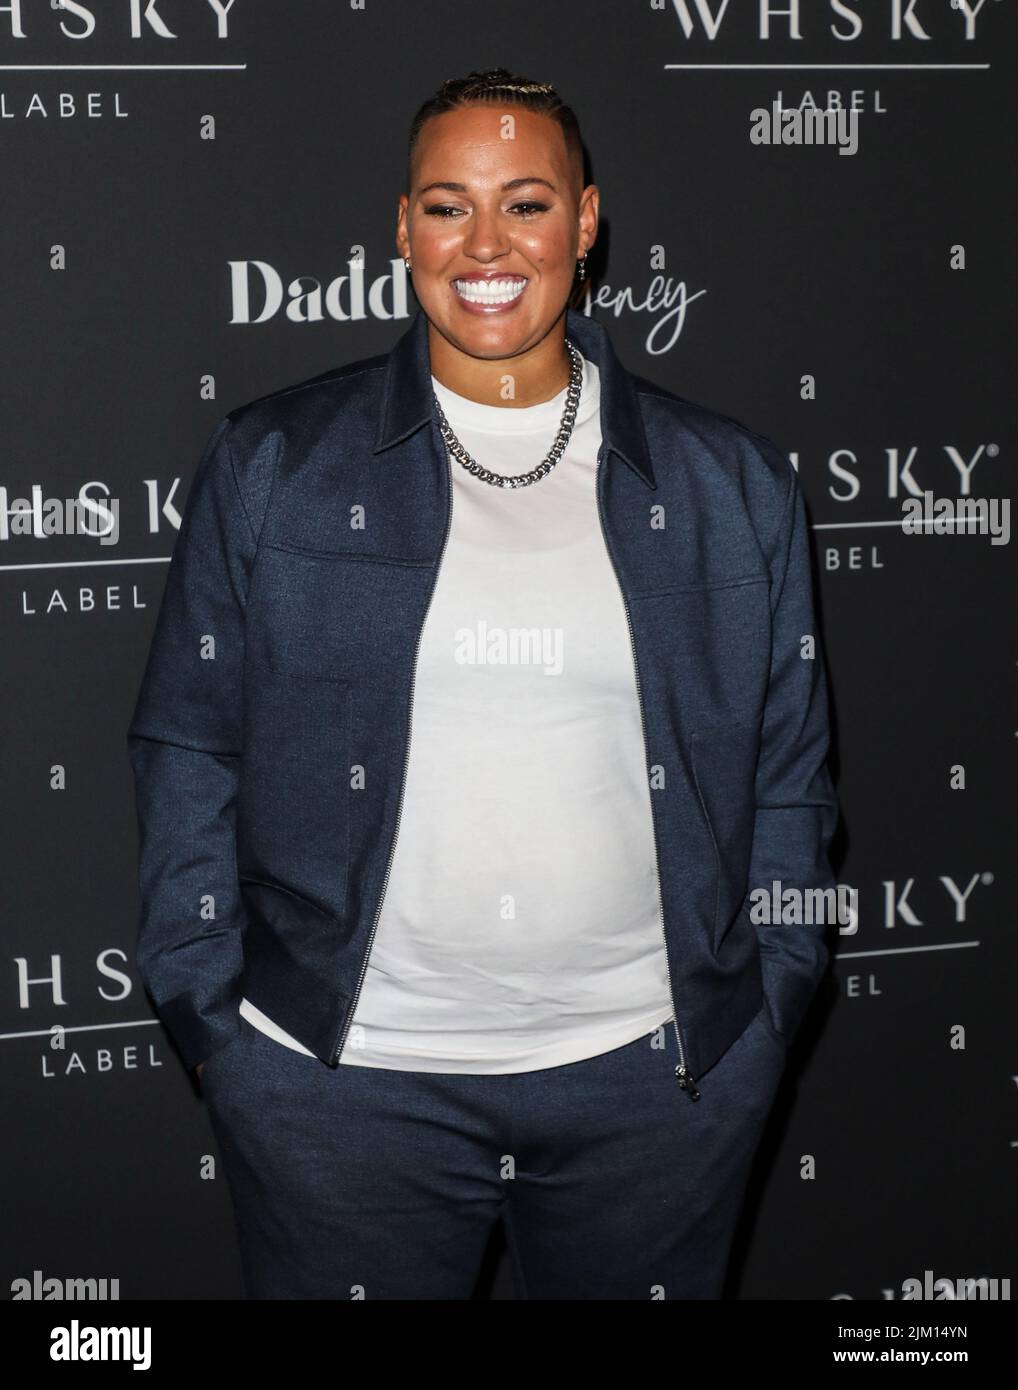 Lianne Sanderson seen attending the WHSKY Label launch party at Aures in London Stock Photo